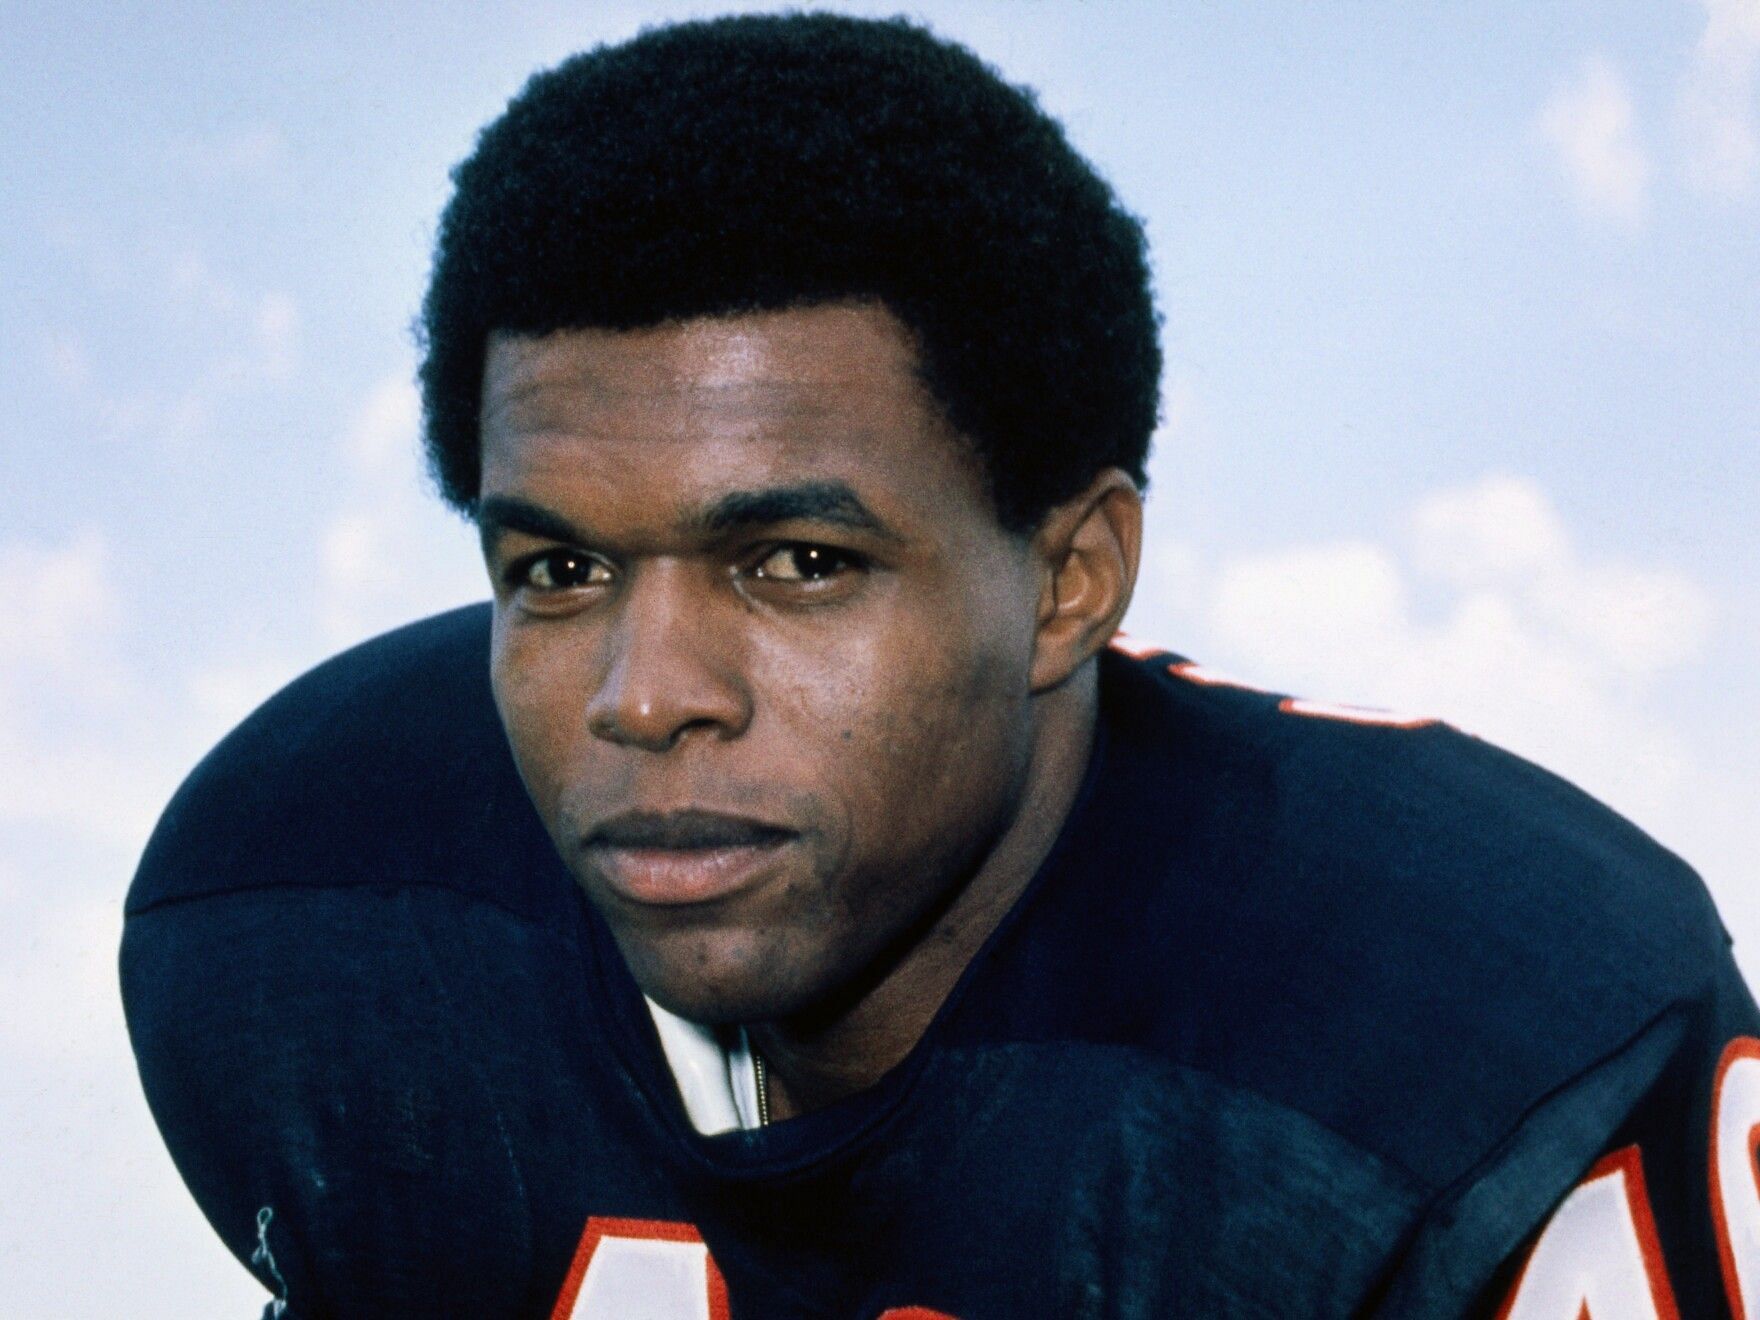 Gale Sayers with the Chicago Bears